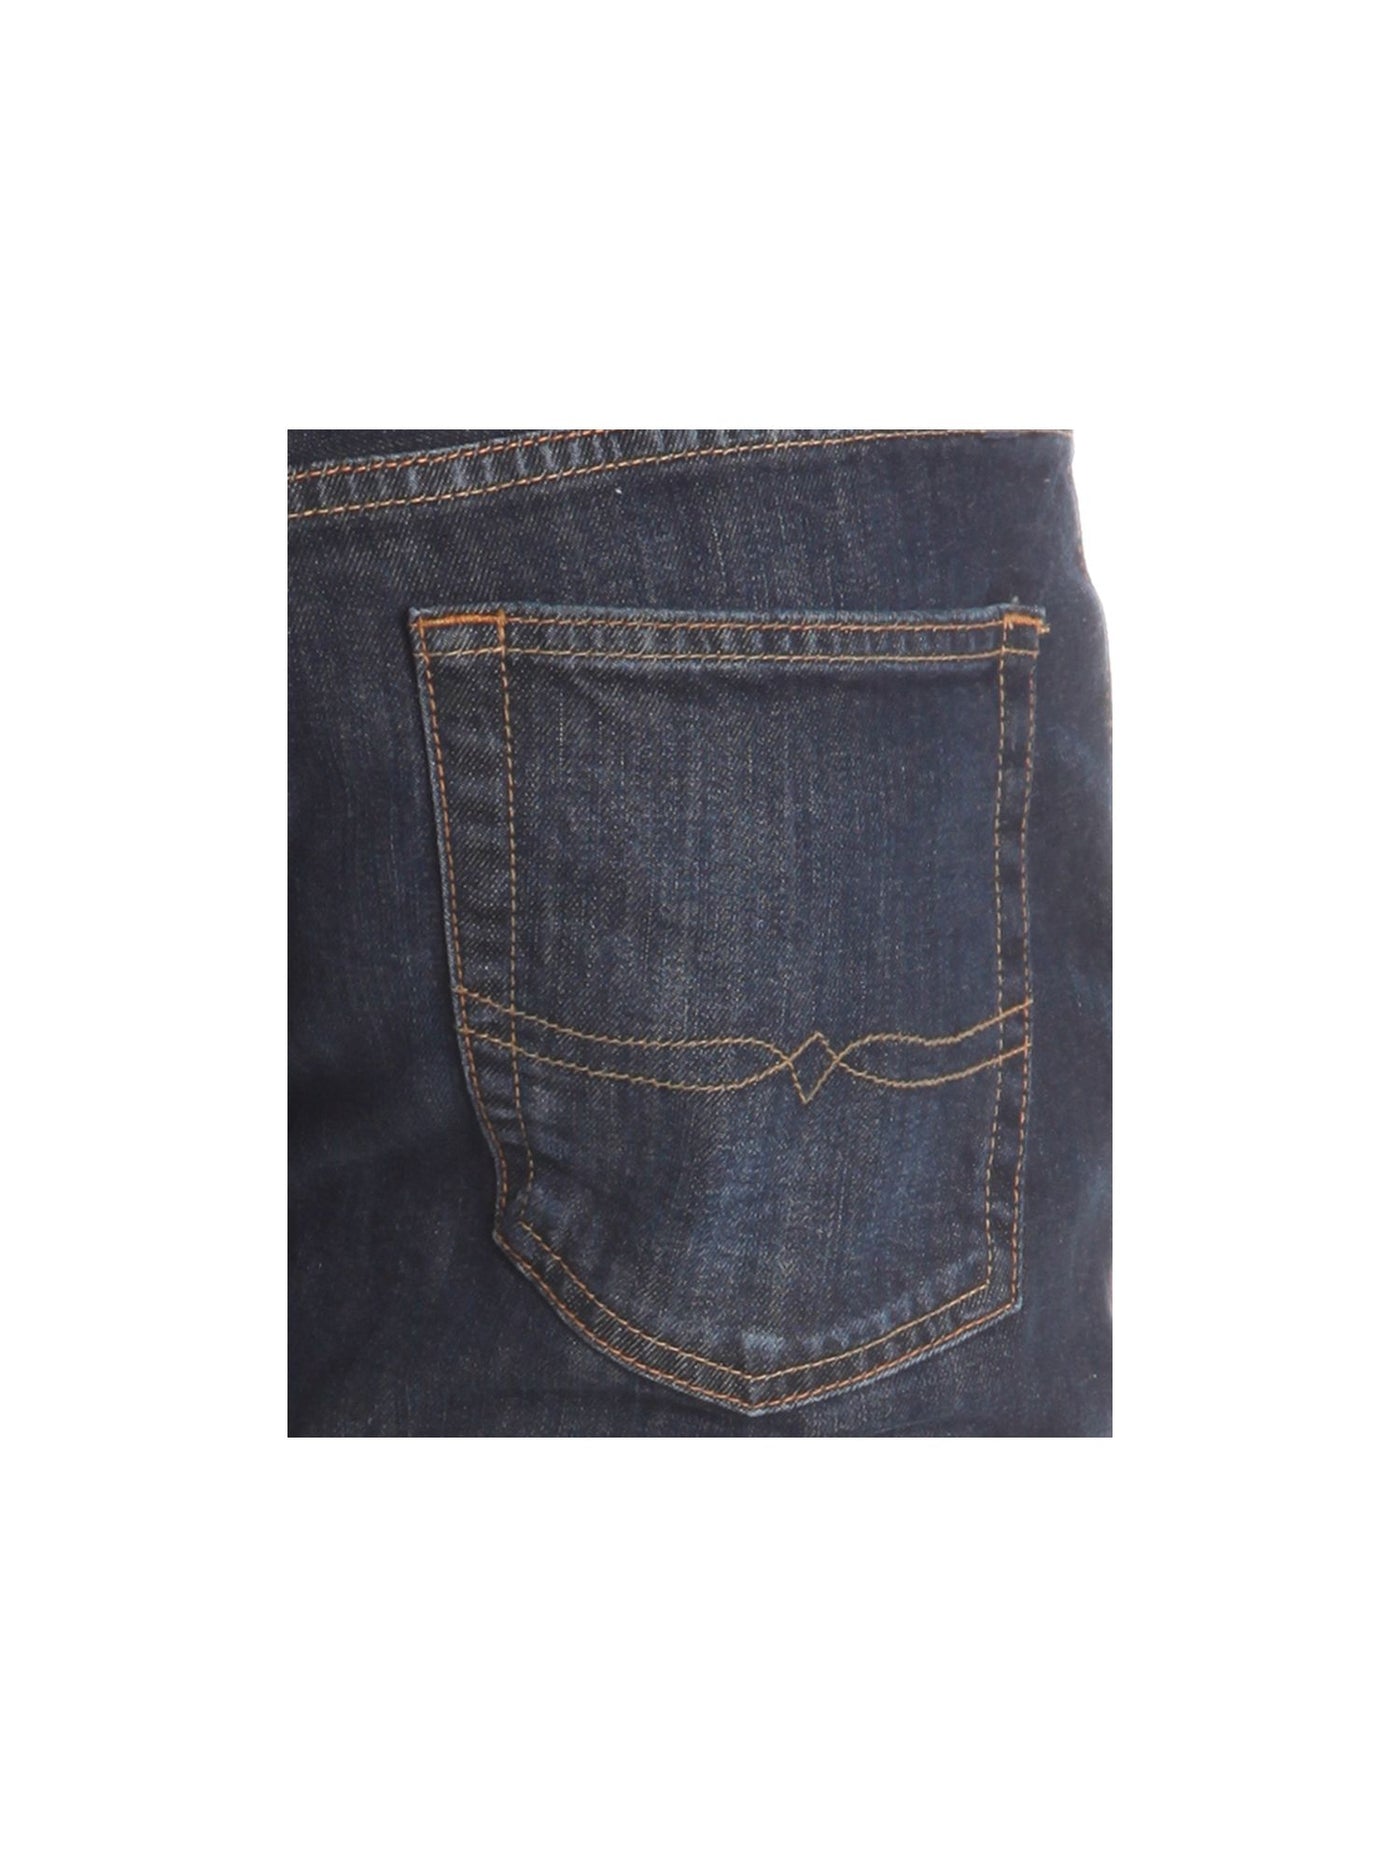 LUCKY BRAND Mens Navy Classic Fit Denim Jeans 40 X 32